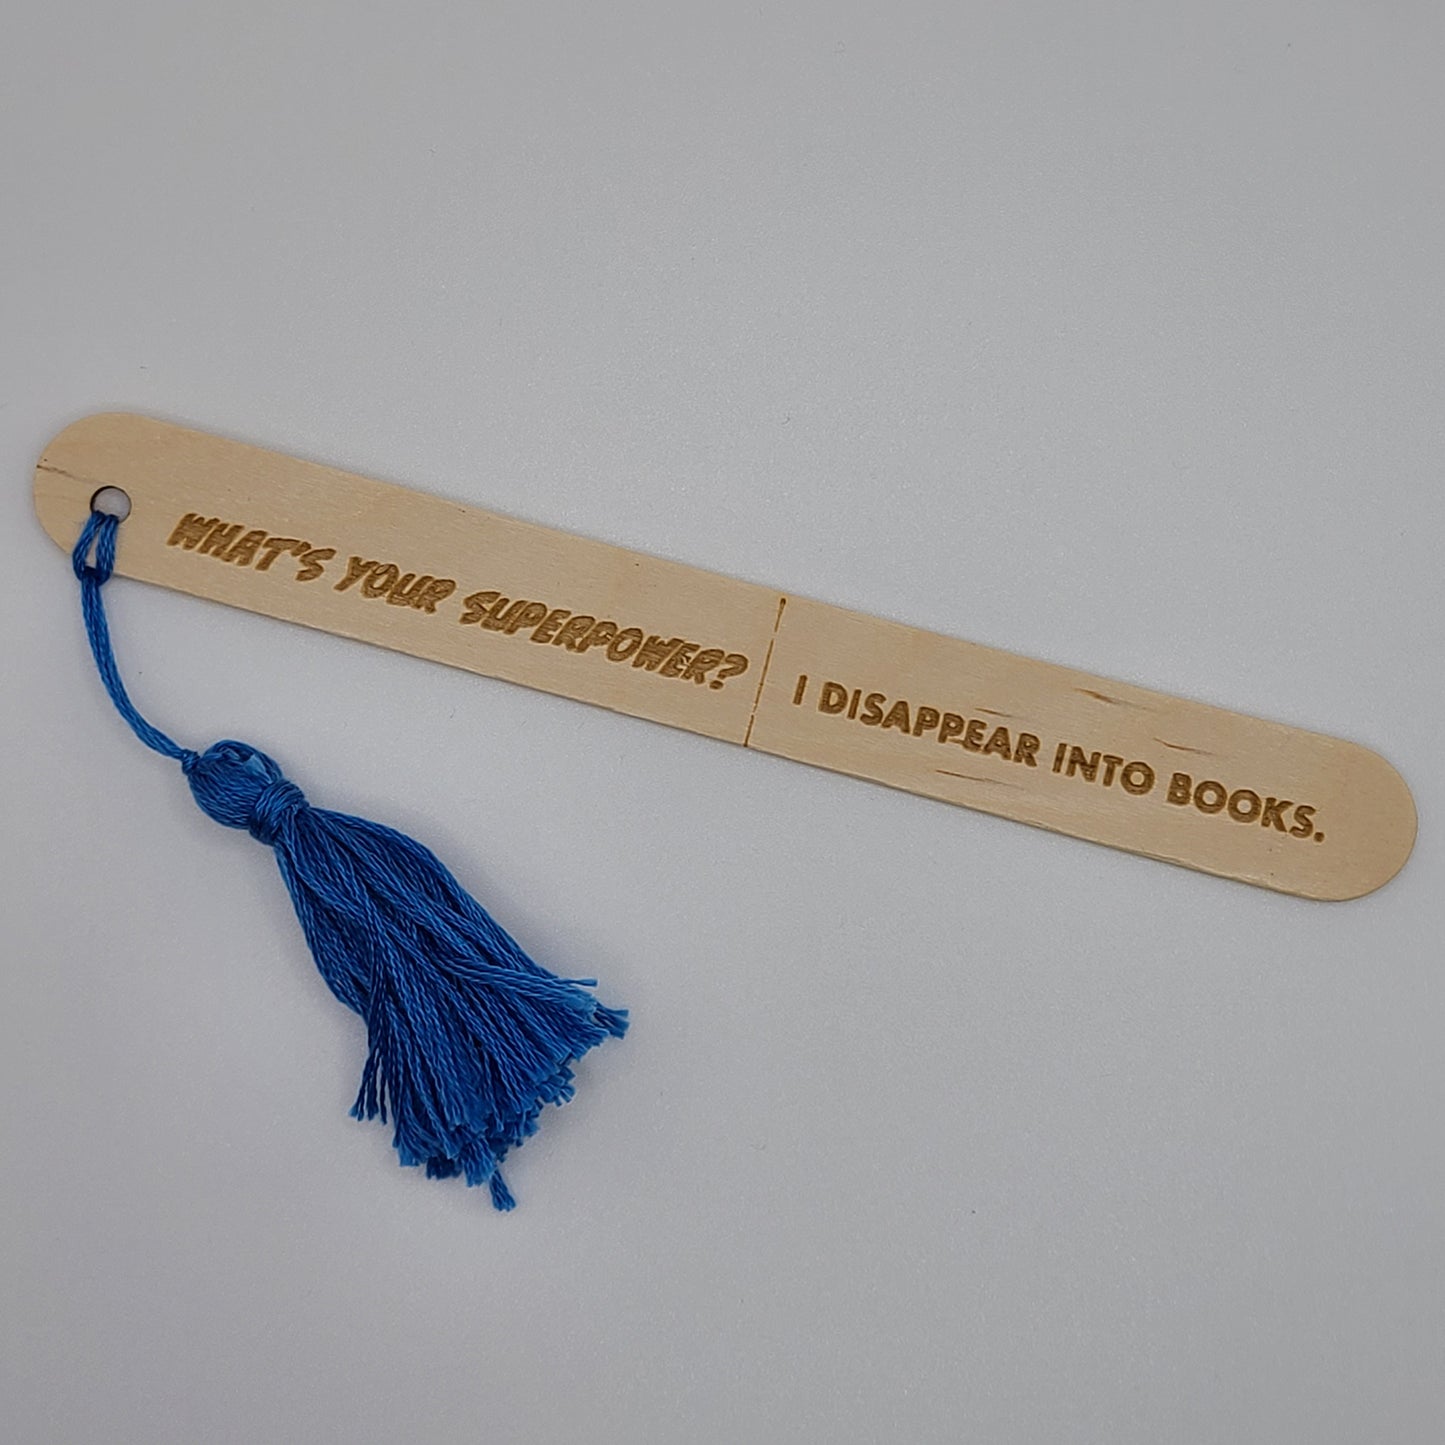 "What's your superpower? I disappear into books." popsicle bookmark